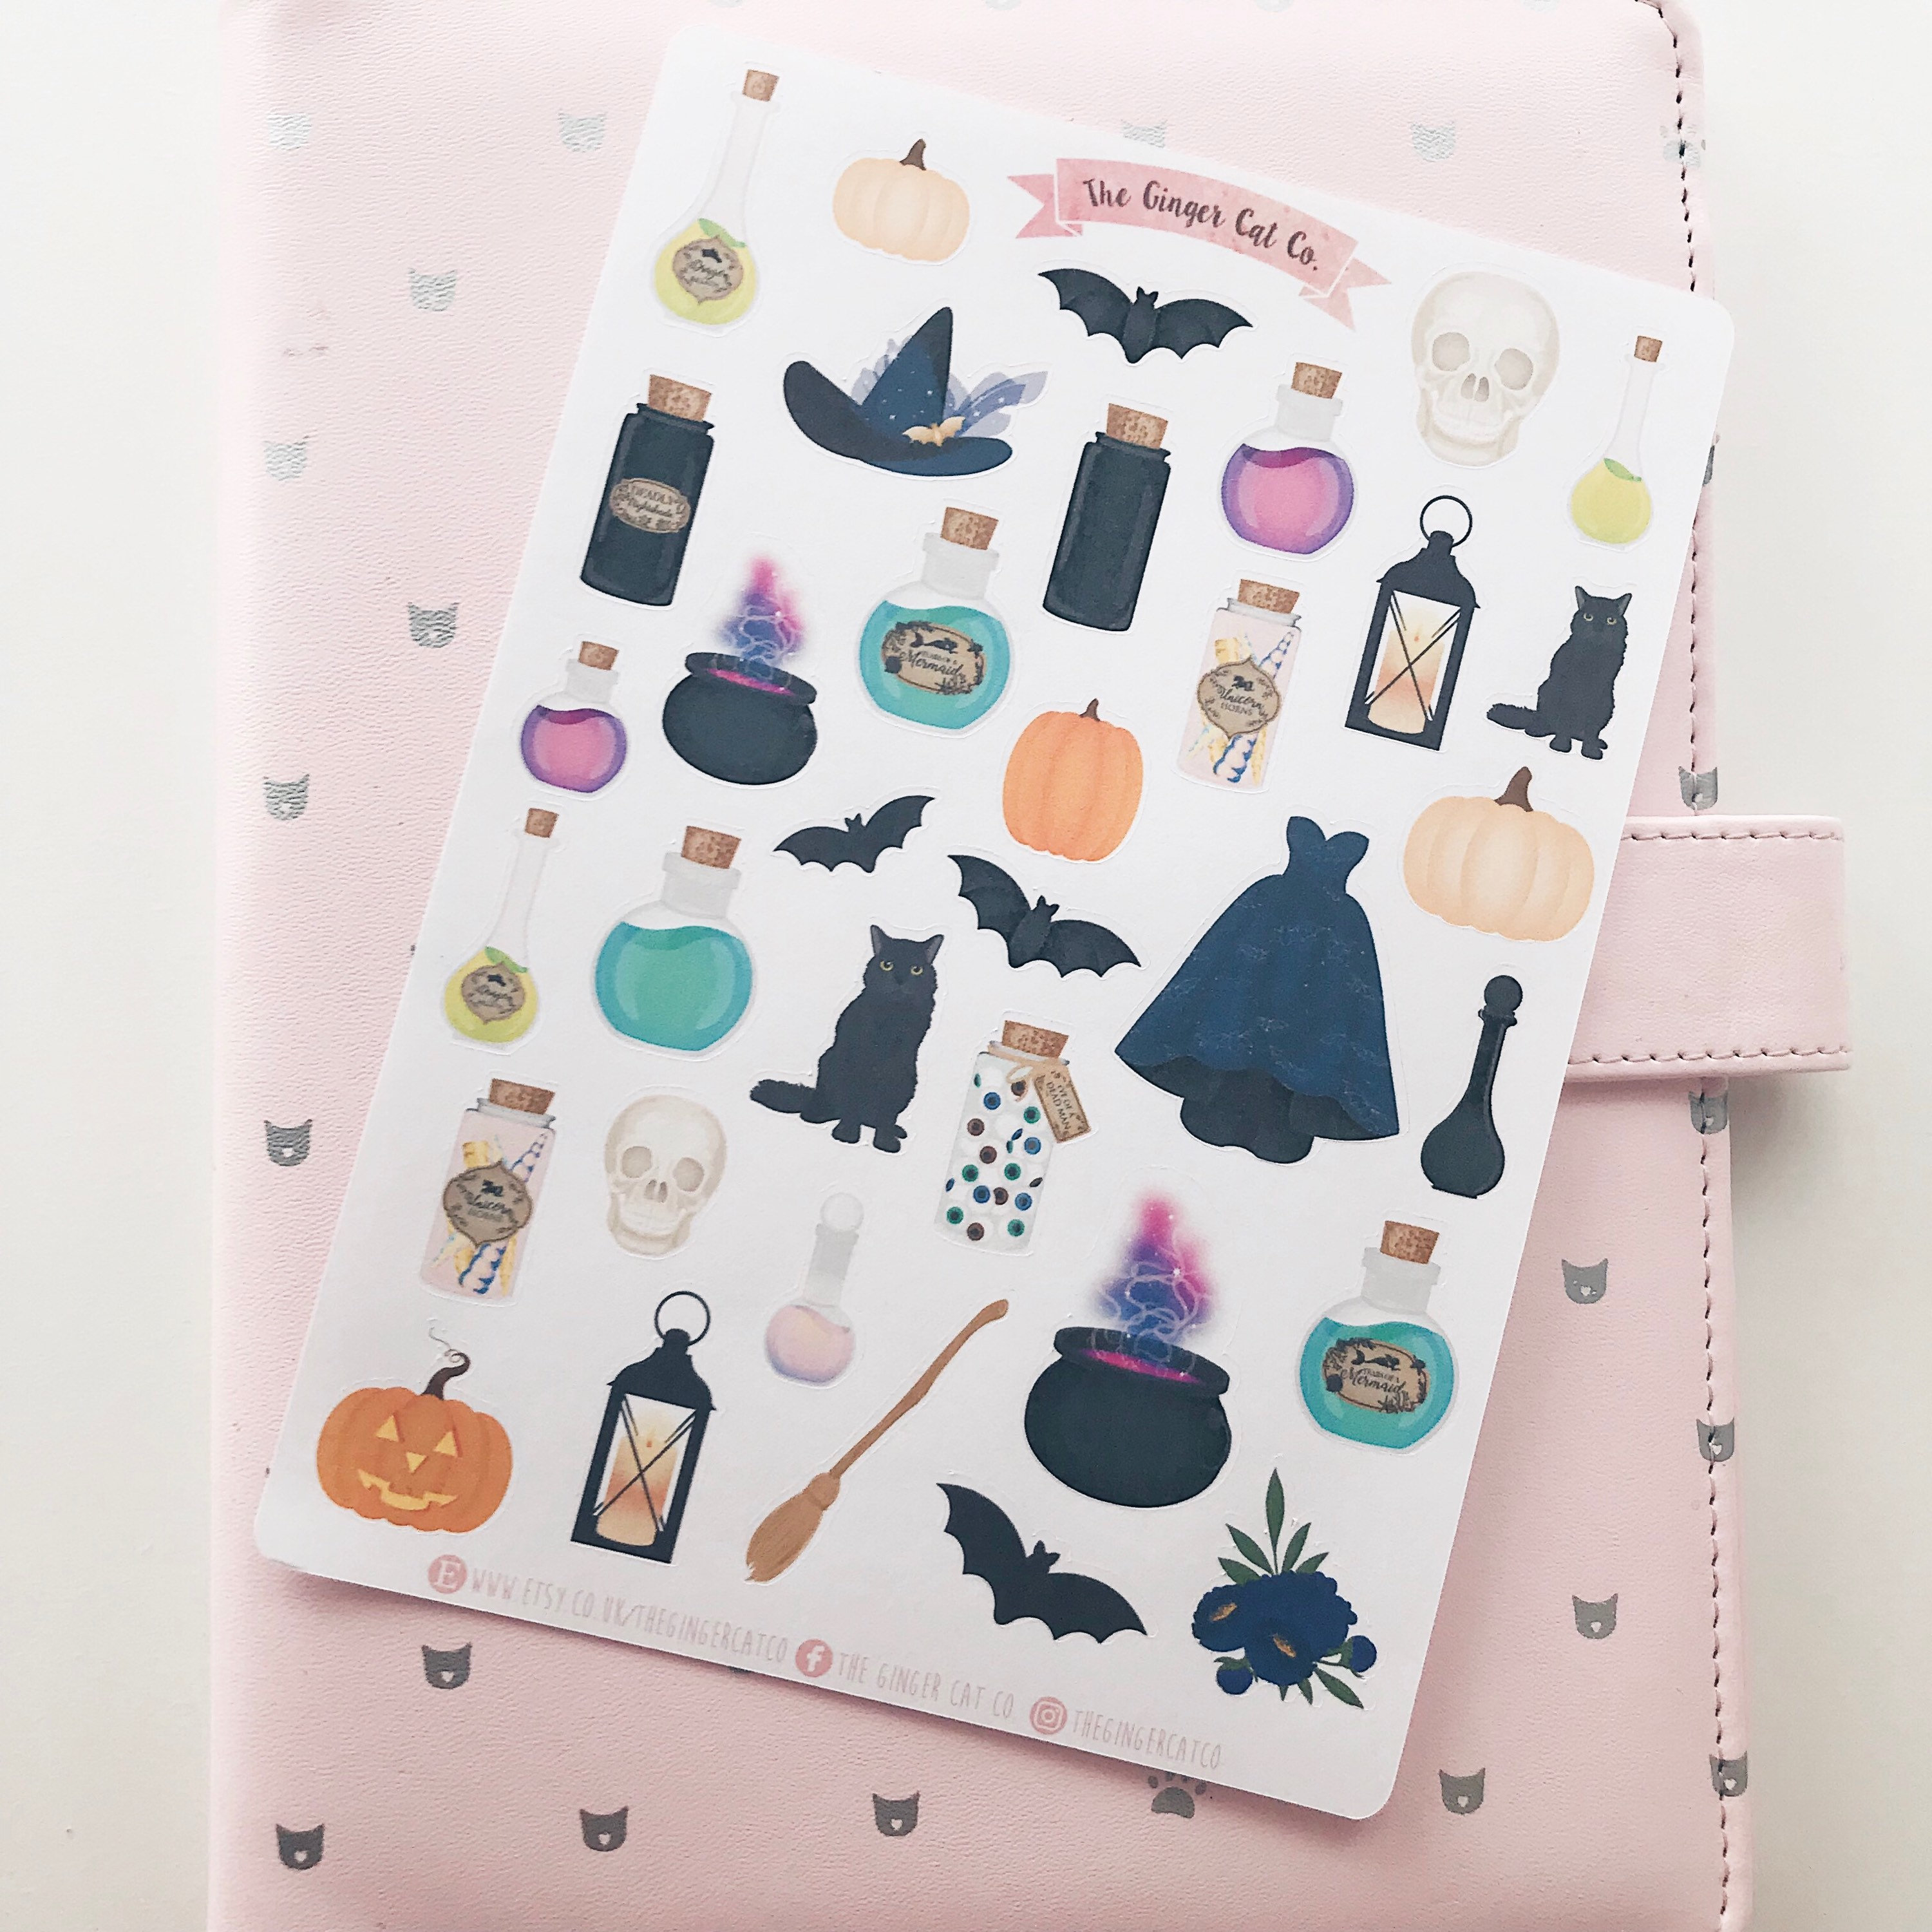 Cute Stickers Bujo Pagan Sticker Sheet BW 001 Journal Stickers Birthday Witch Pastel Planner Stickers Witchy Stickers